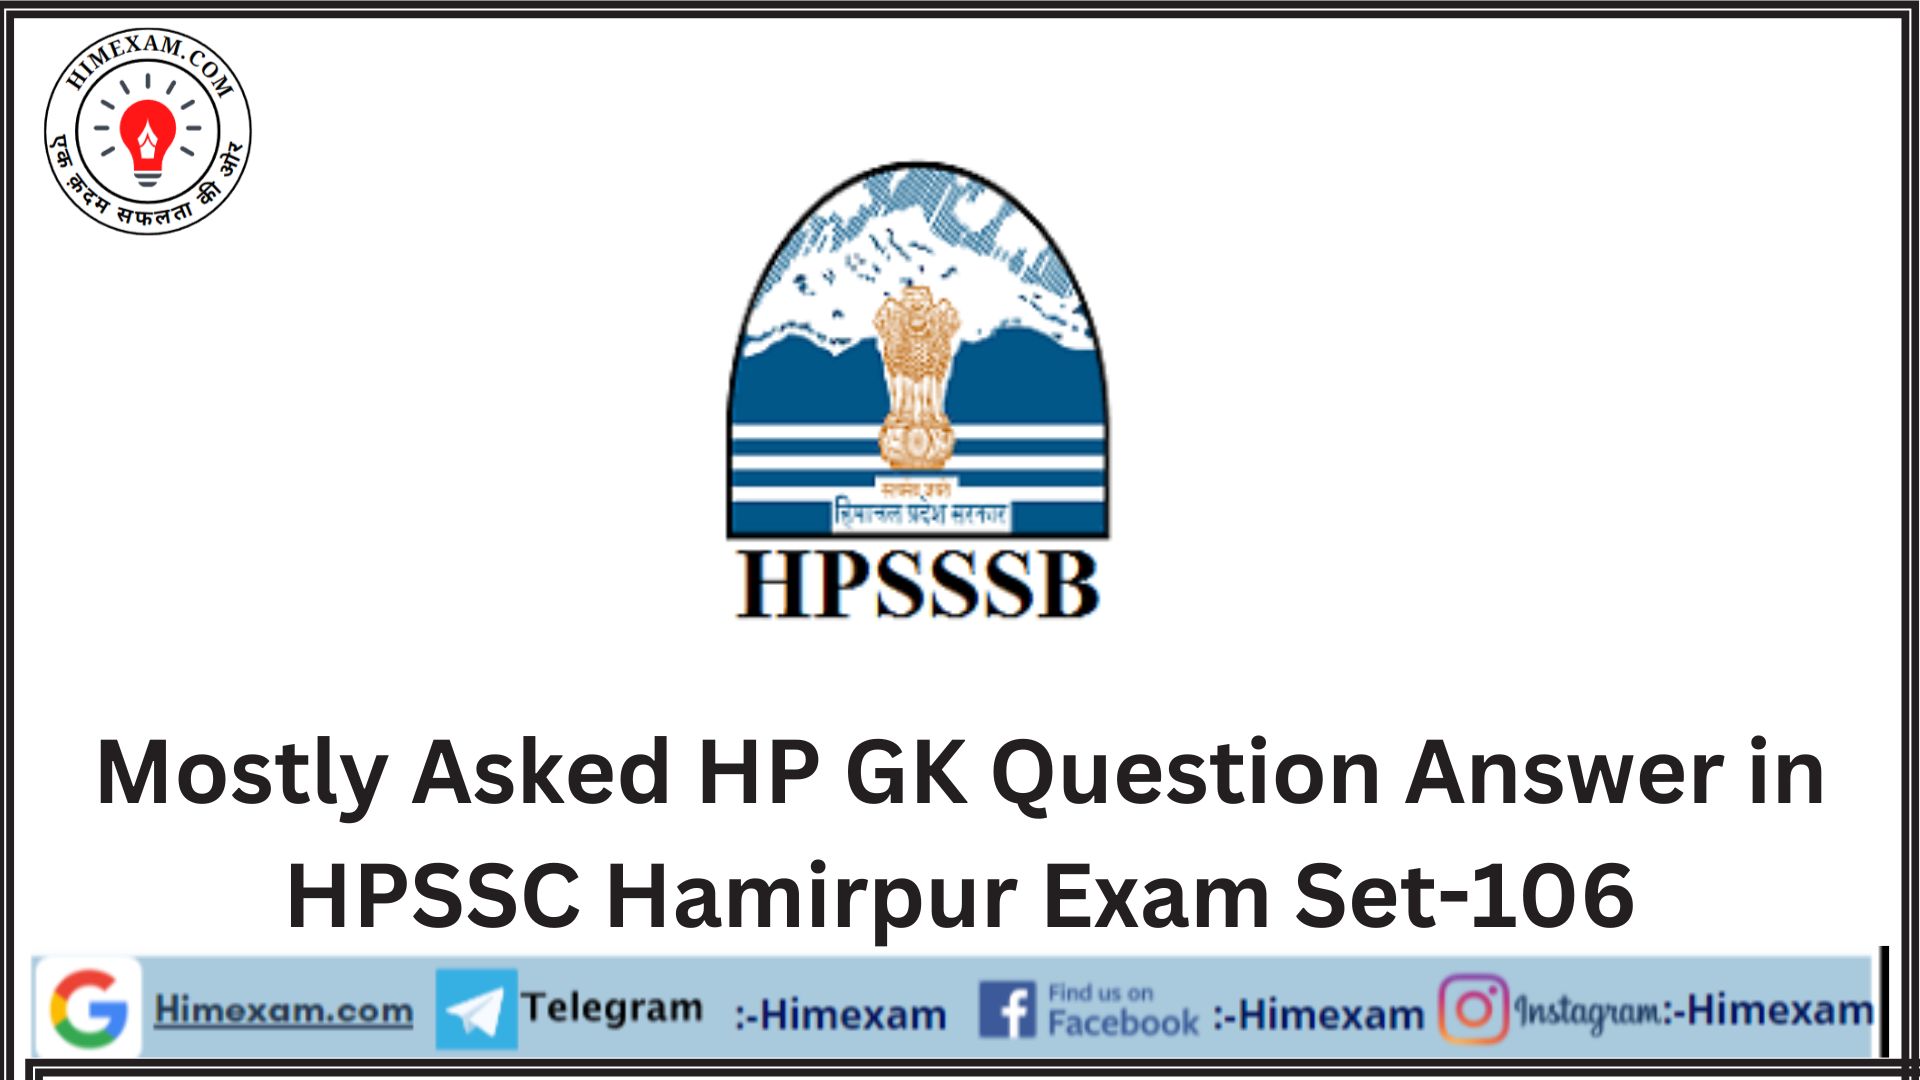 Mostly Asked HP GK Question Answer in HPSSC Hamirpur Exam Set-106